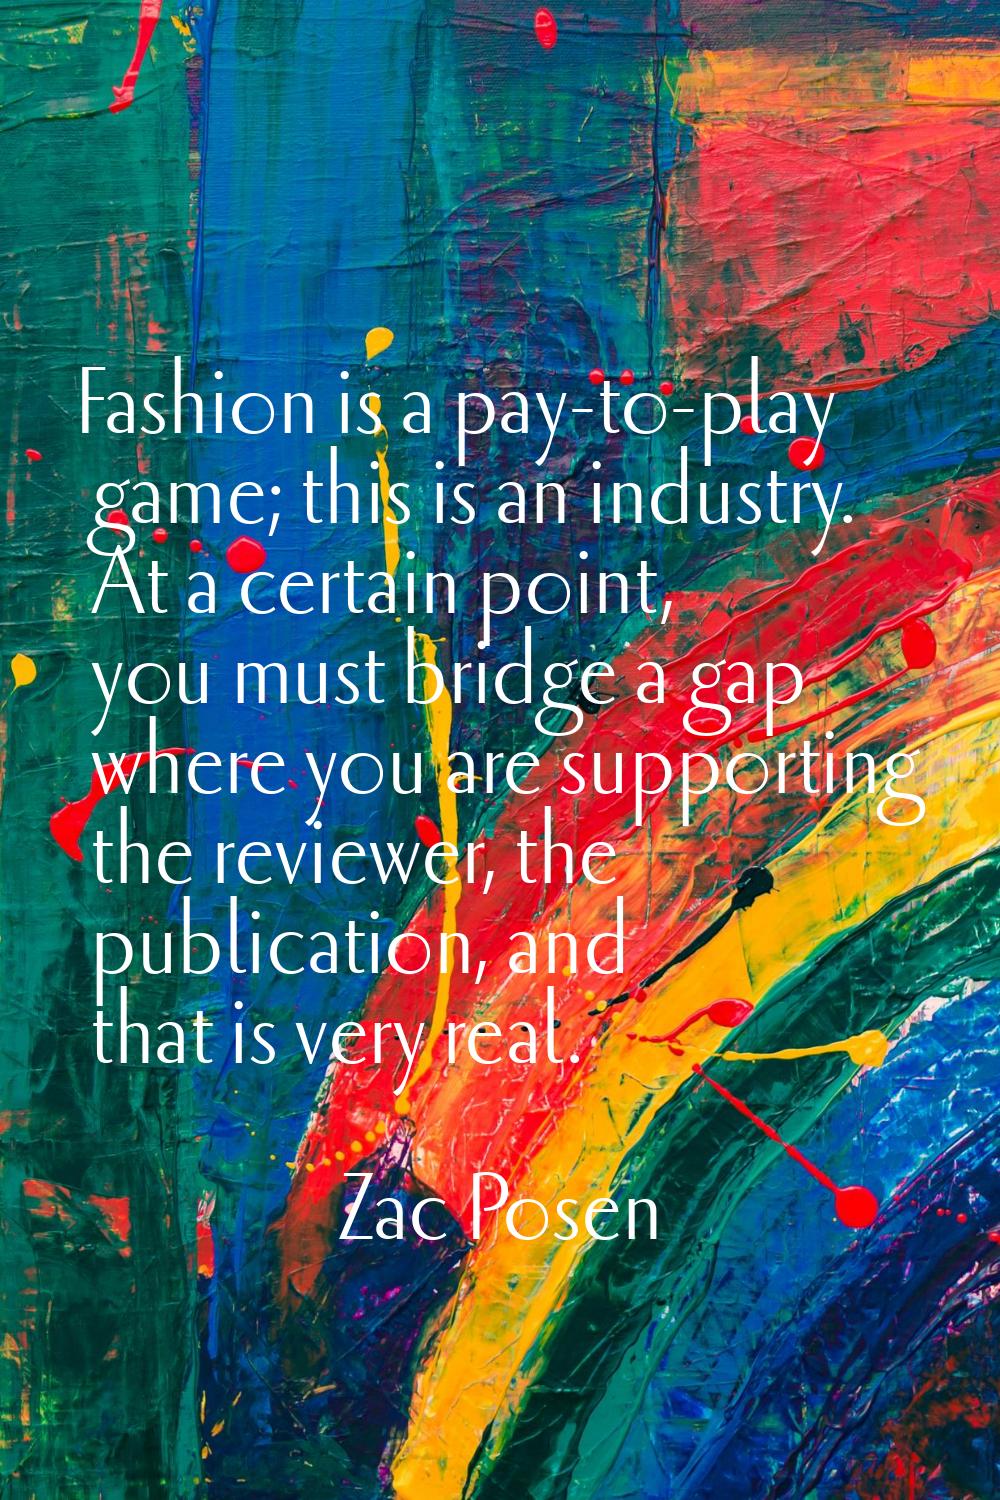 Fashion is a pay-to-play game; this is an industry. At a certain point, you must bridge a gap where